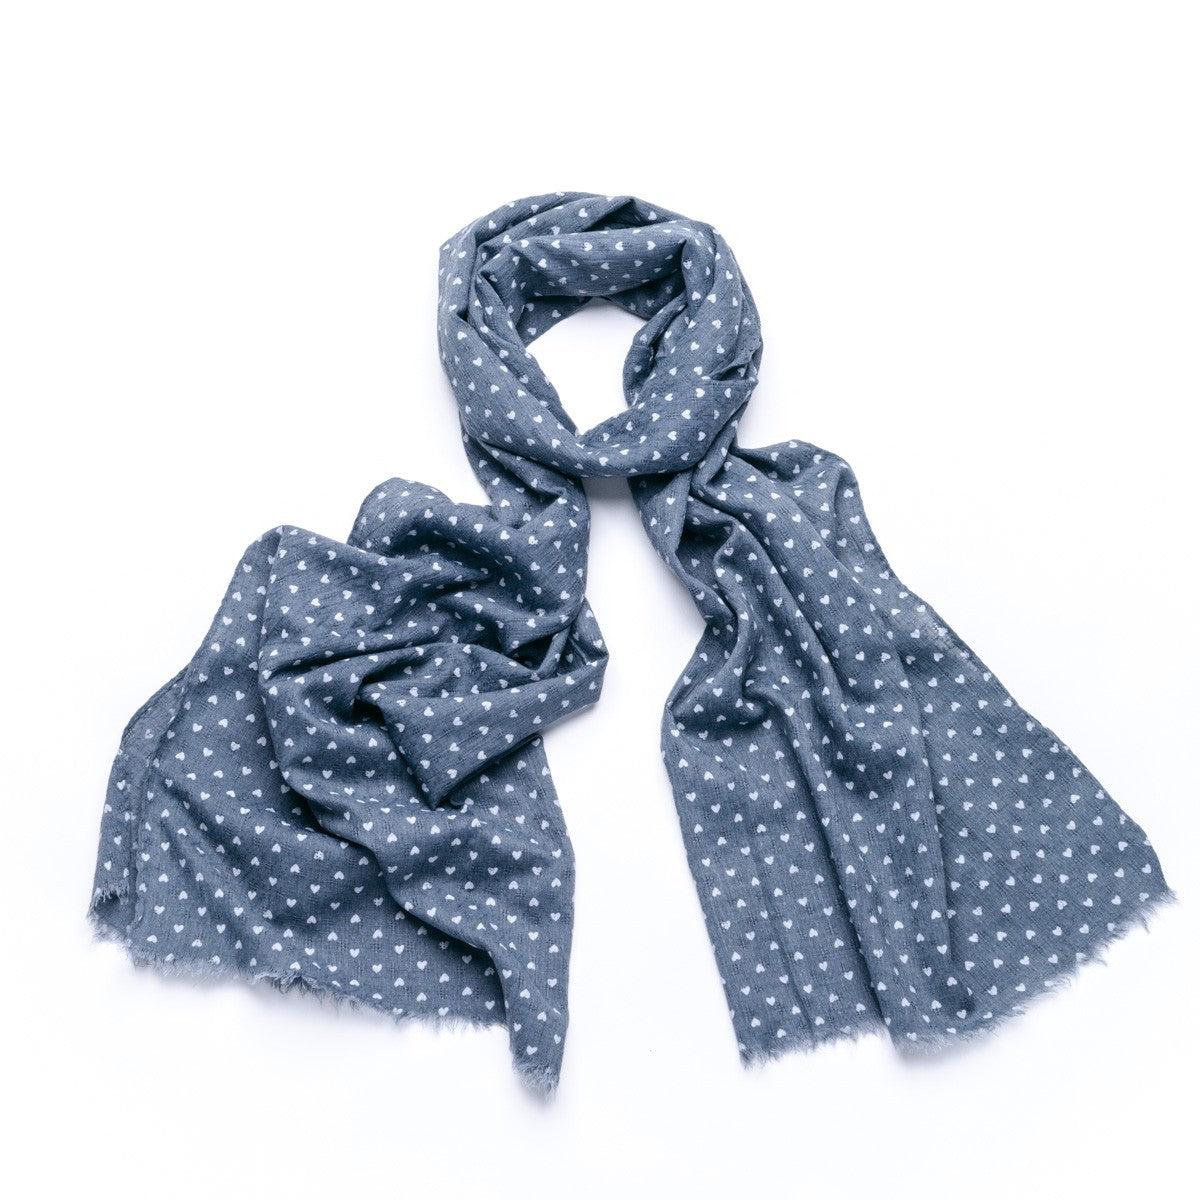 Grey ditsy heart printed scarf with feathered edge